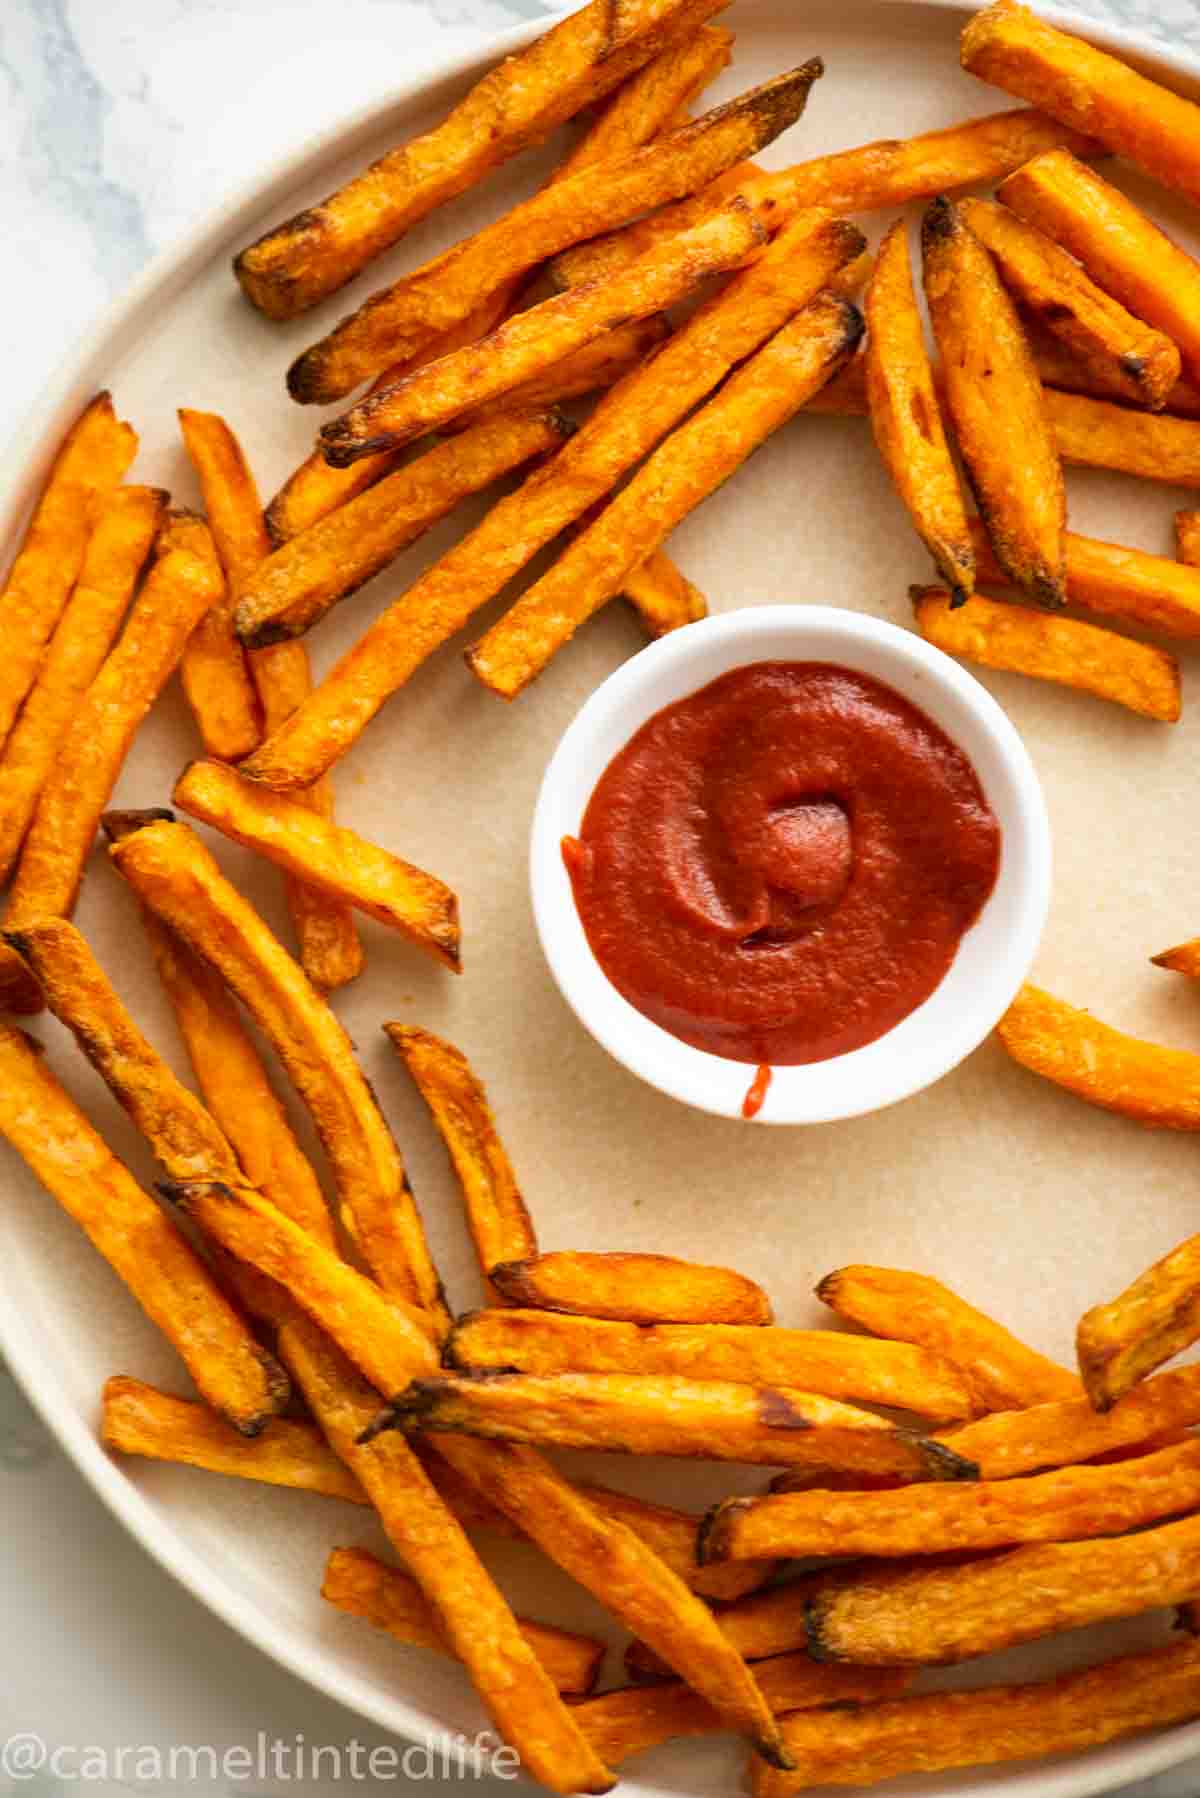 Sweet potato fries on a plate with ketchup in a bowl